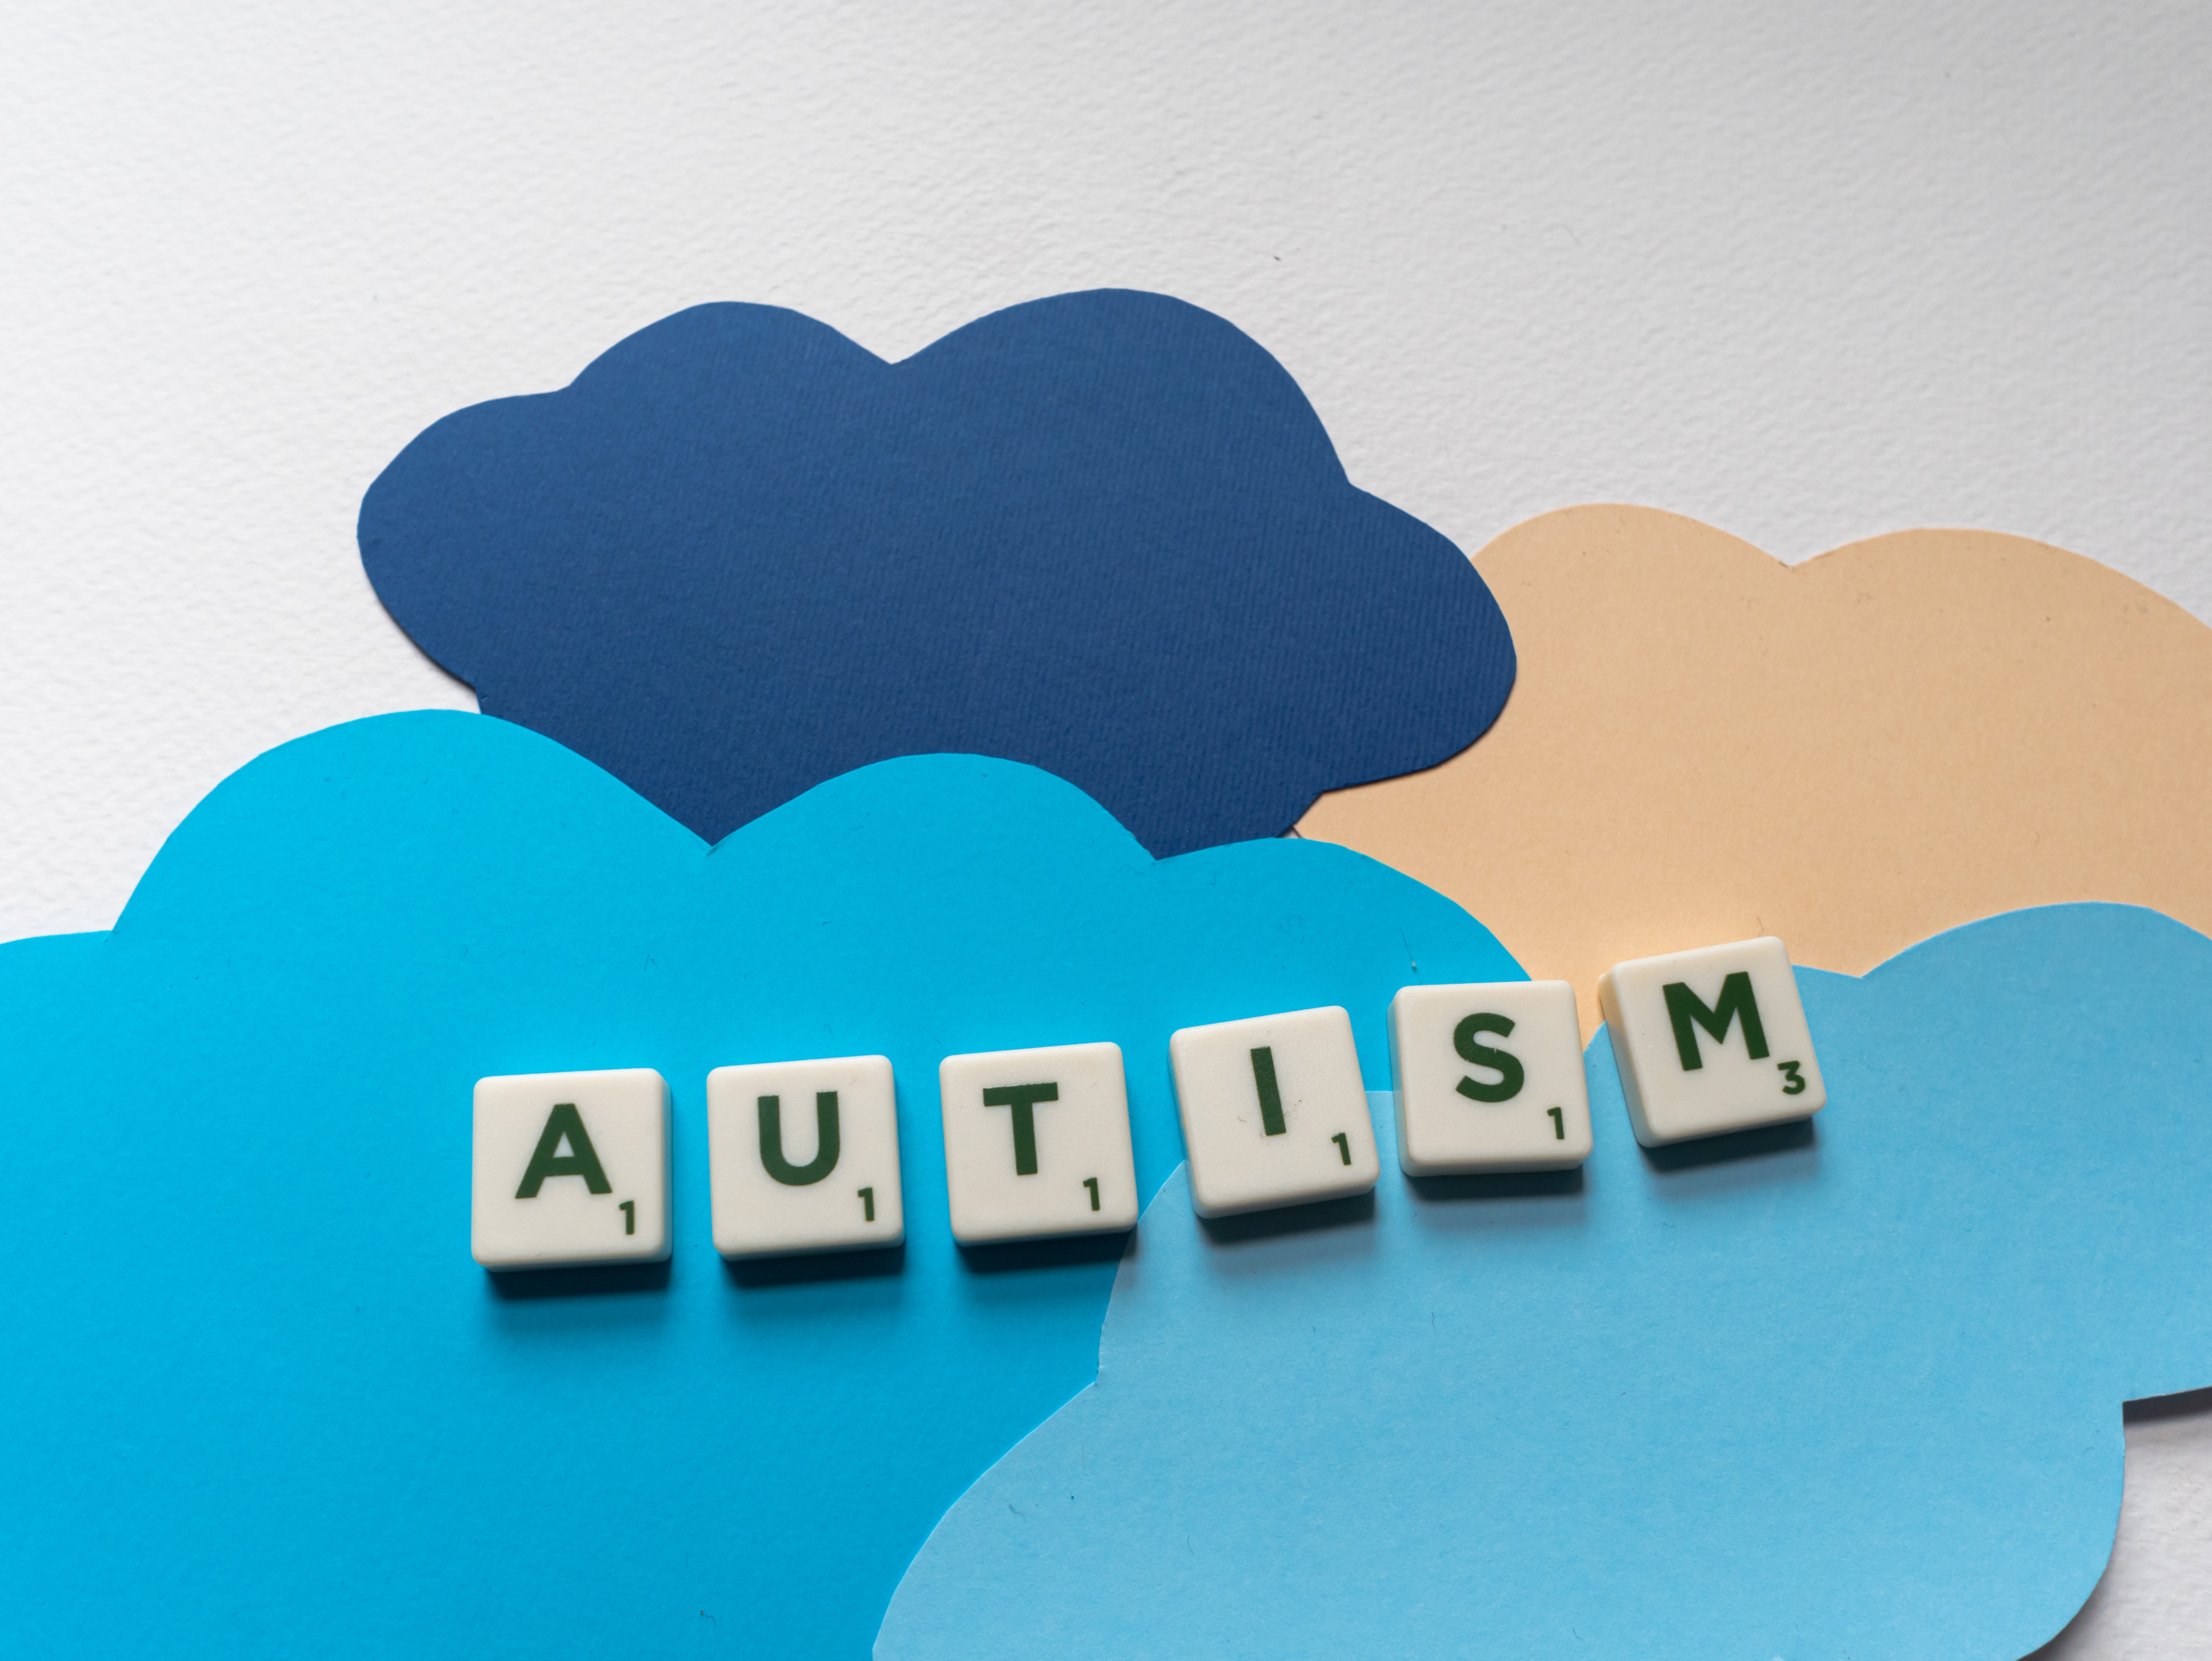 Generic picture with the word 'Autism' spelled out